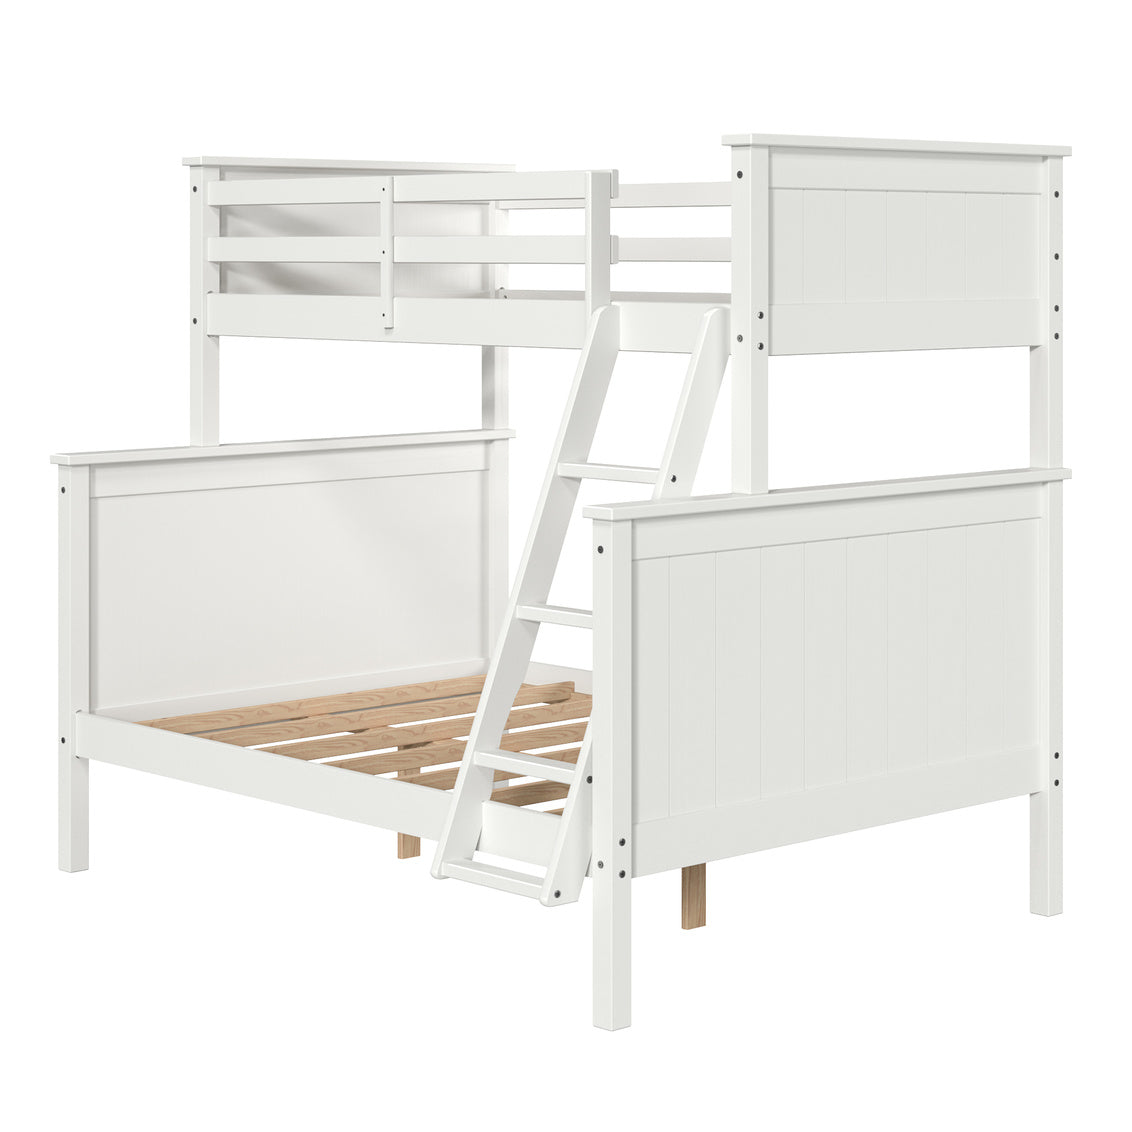 WEEKLY or MONTHLY. Peyton White Twin over Full Bunk Bed